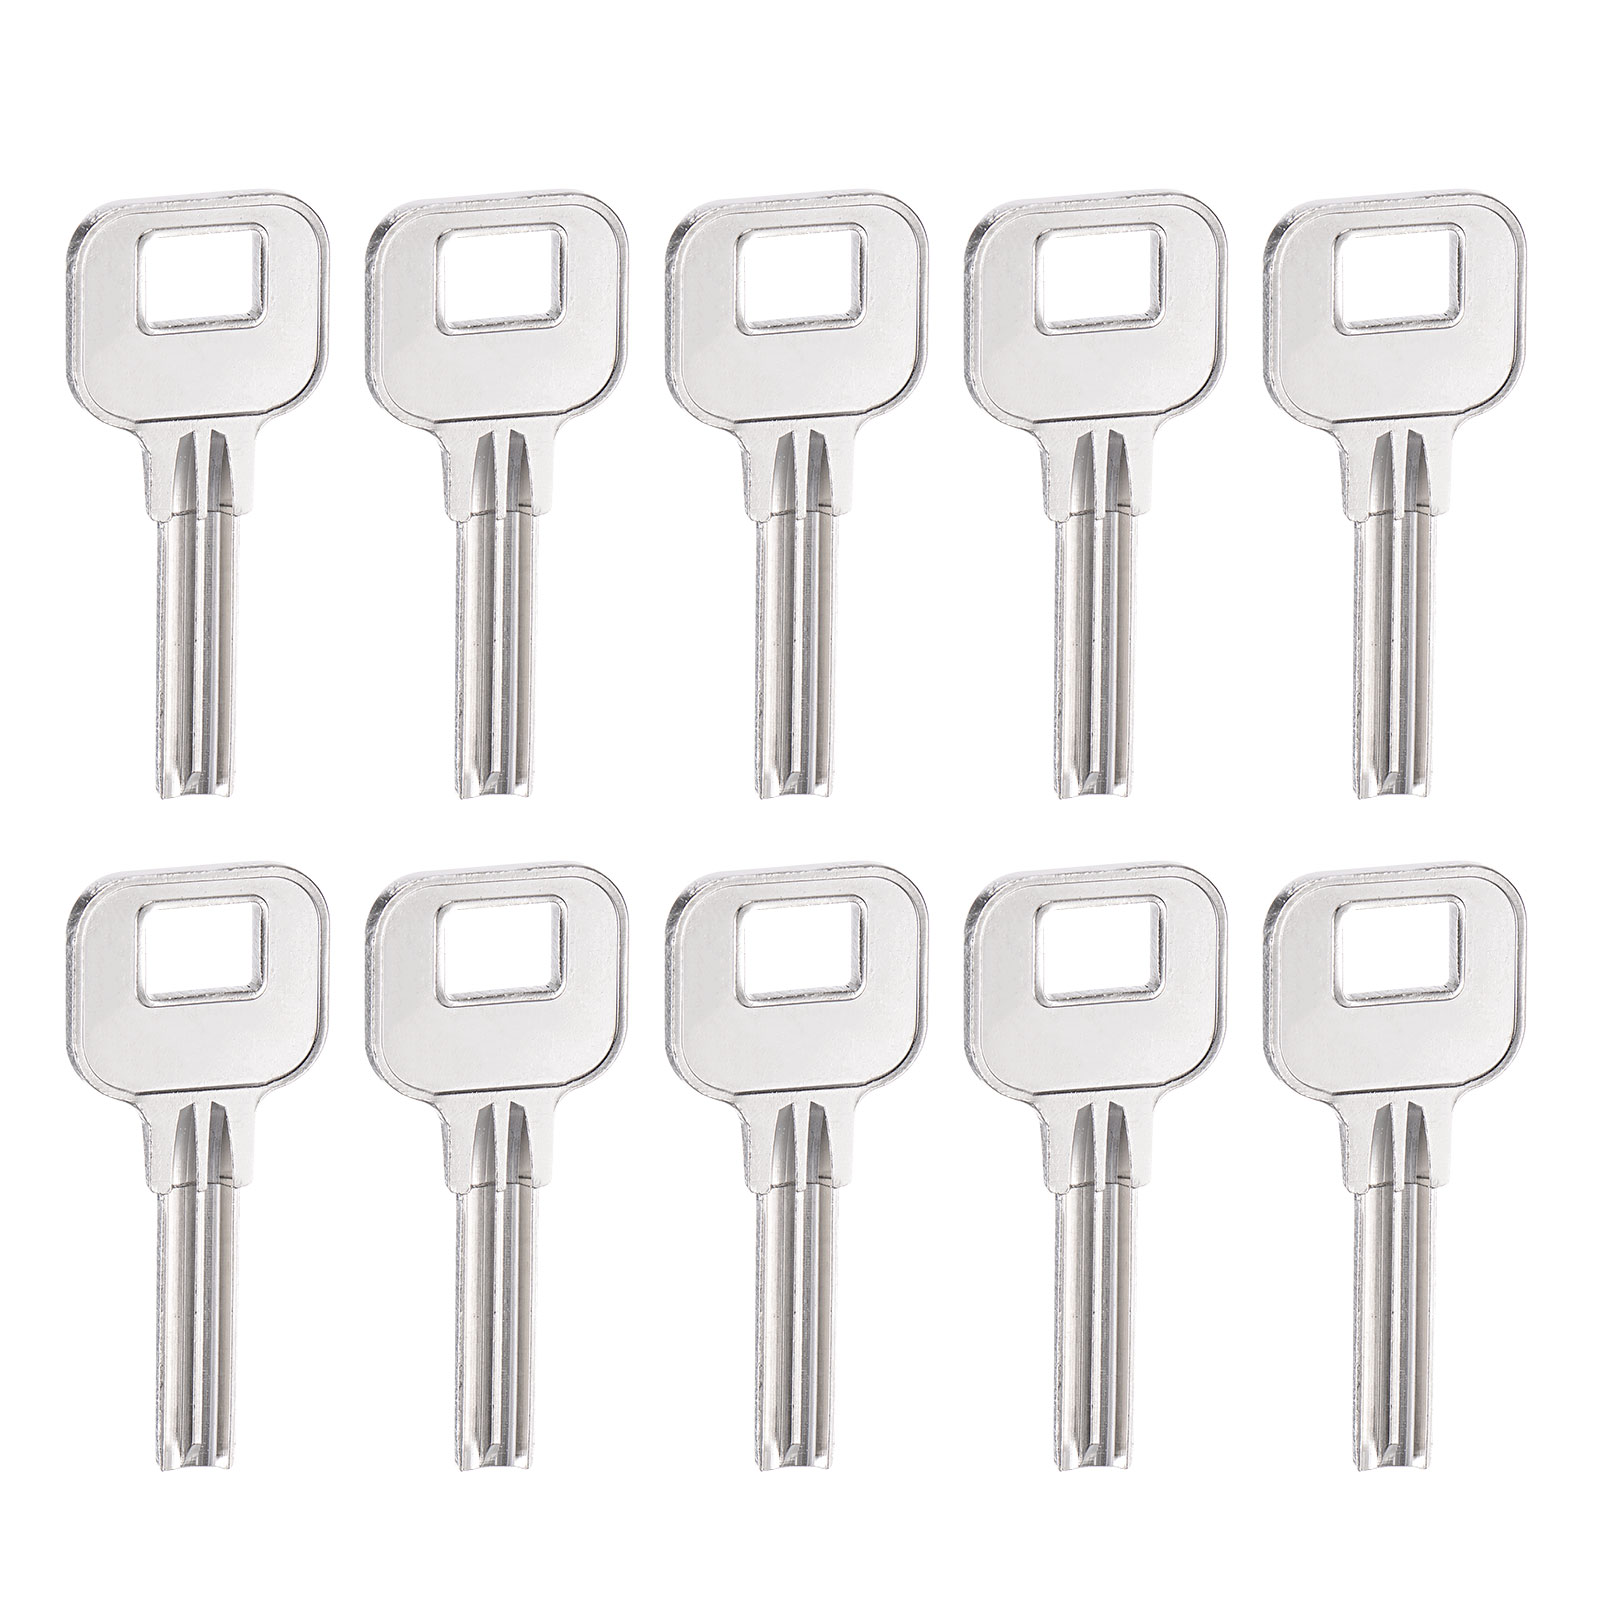 Uxcell Key Blanks, 28mm Length 2 Slot Brass New Un-cut Replacement Accessories 10 Pack - image 1 of 5